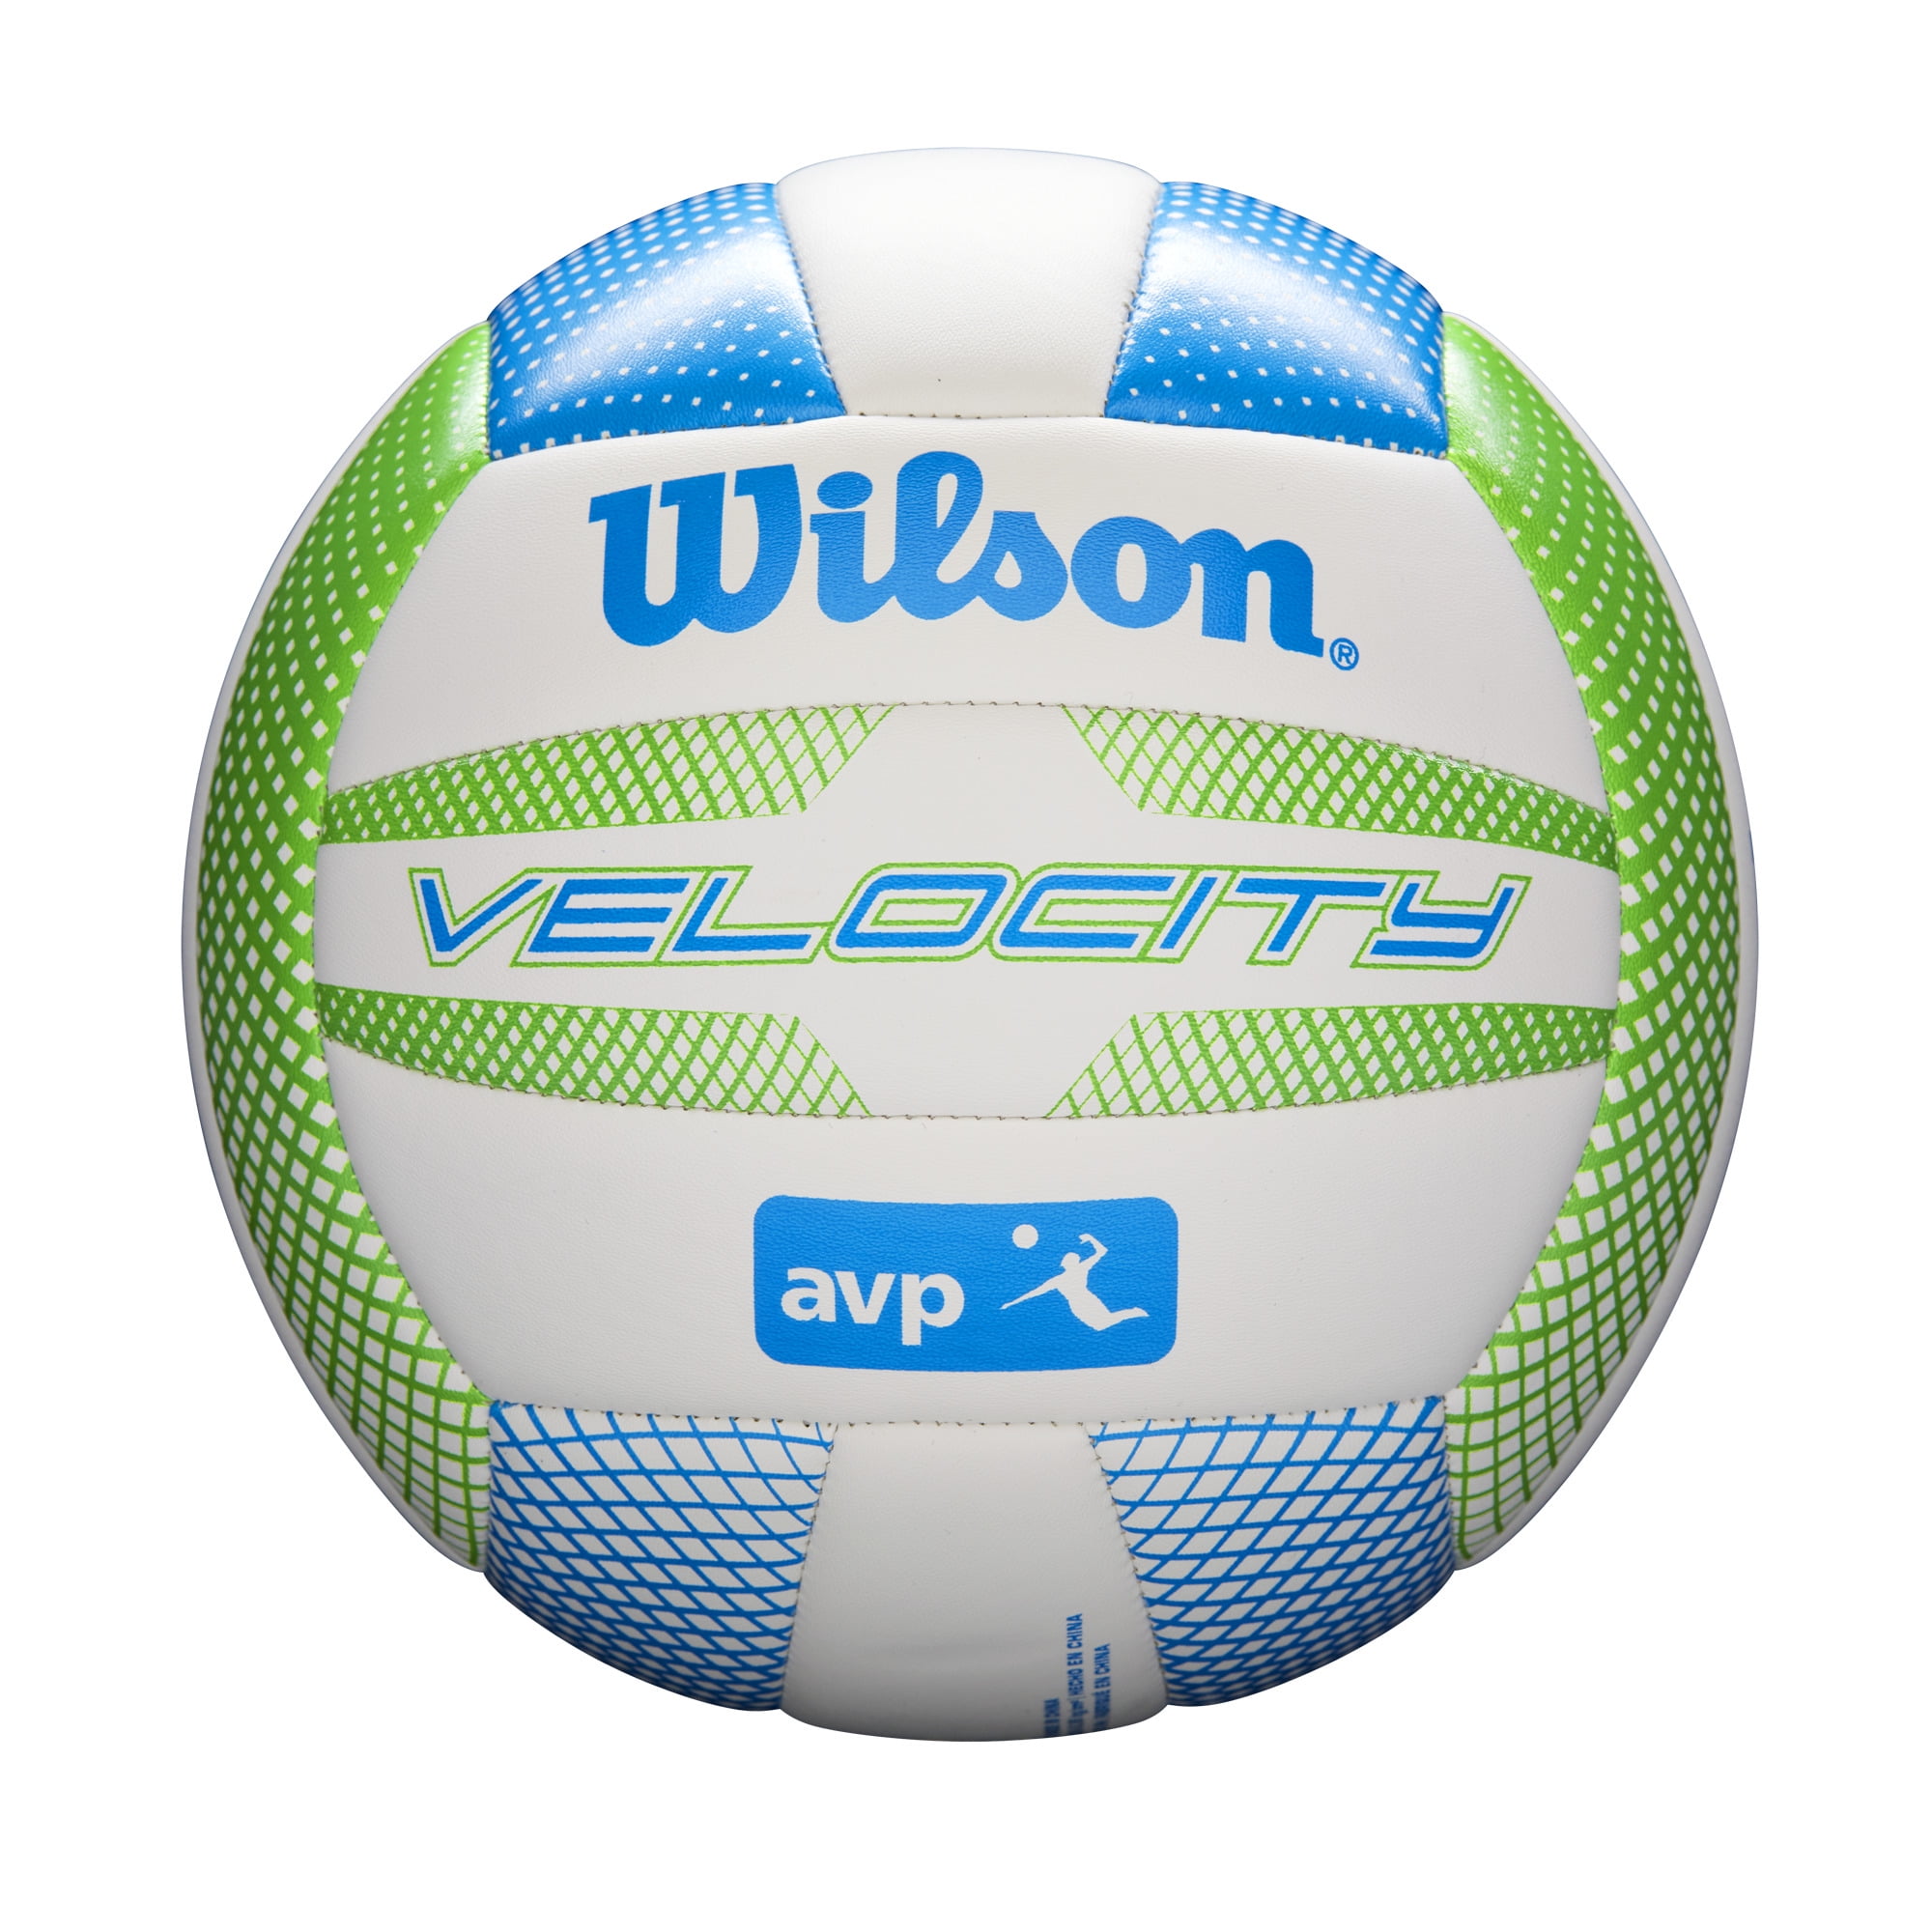 BEST SELLER WILSON GLOW IN THE DARK  VOLLEYBALL OFFICIAL SIZE AND WEIGHT 